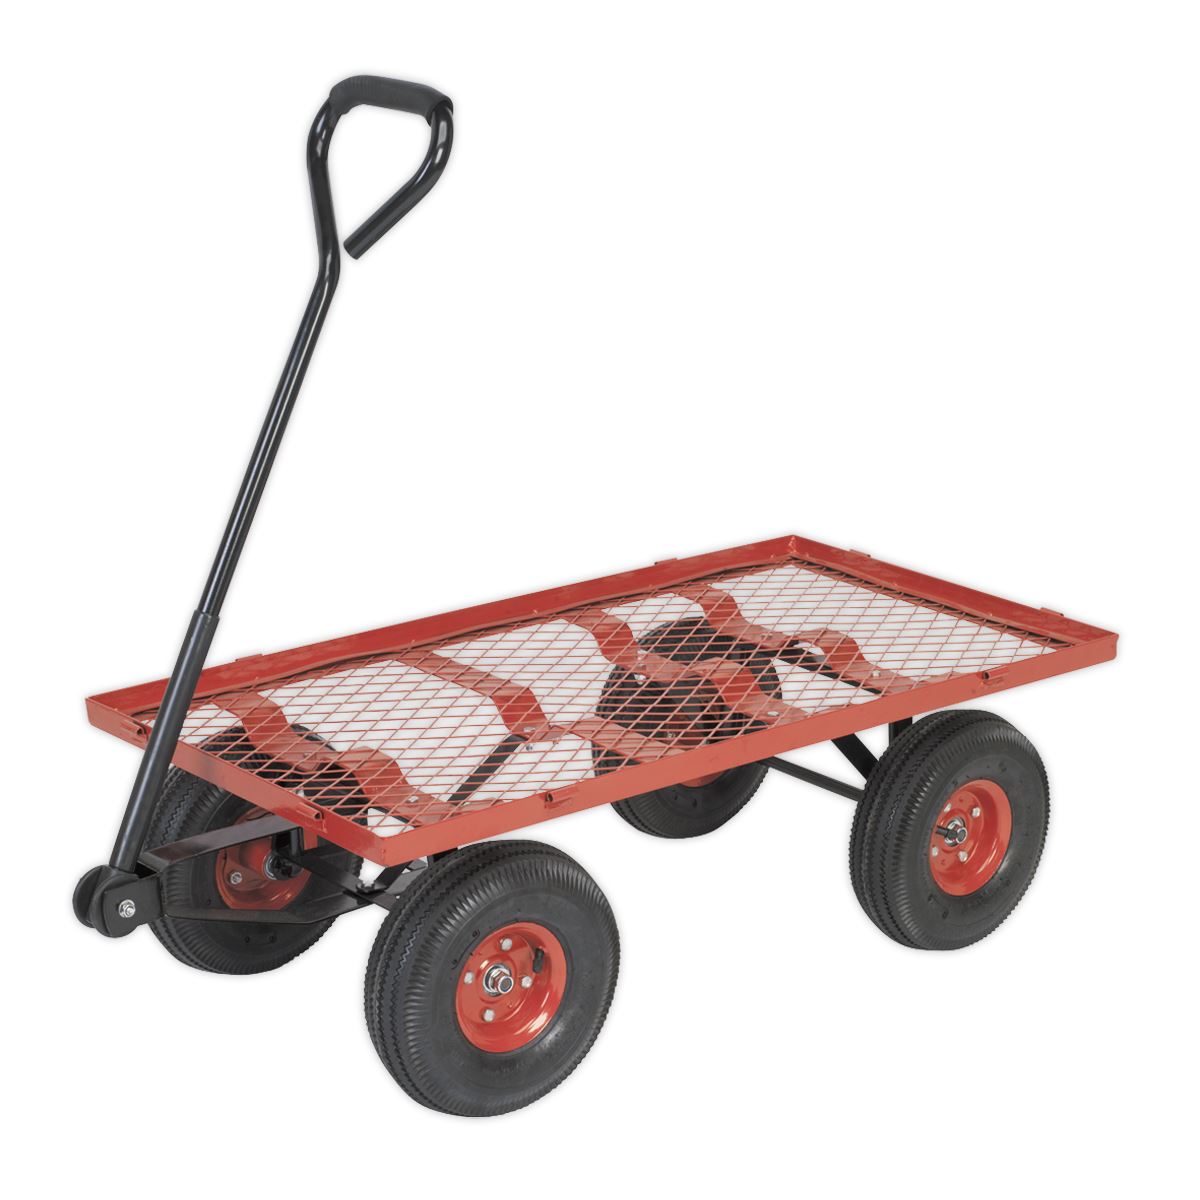 Sealey Platform Truck with Removable Sides Pneumatic Tyres 200kg Capacity